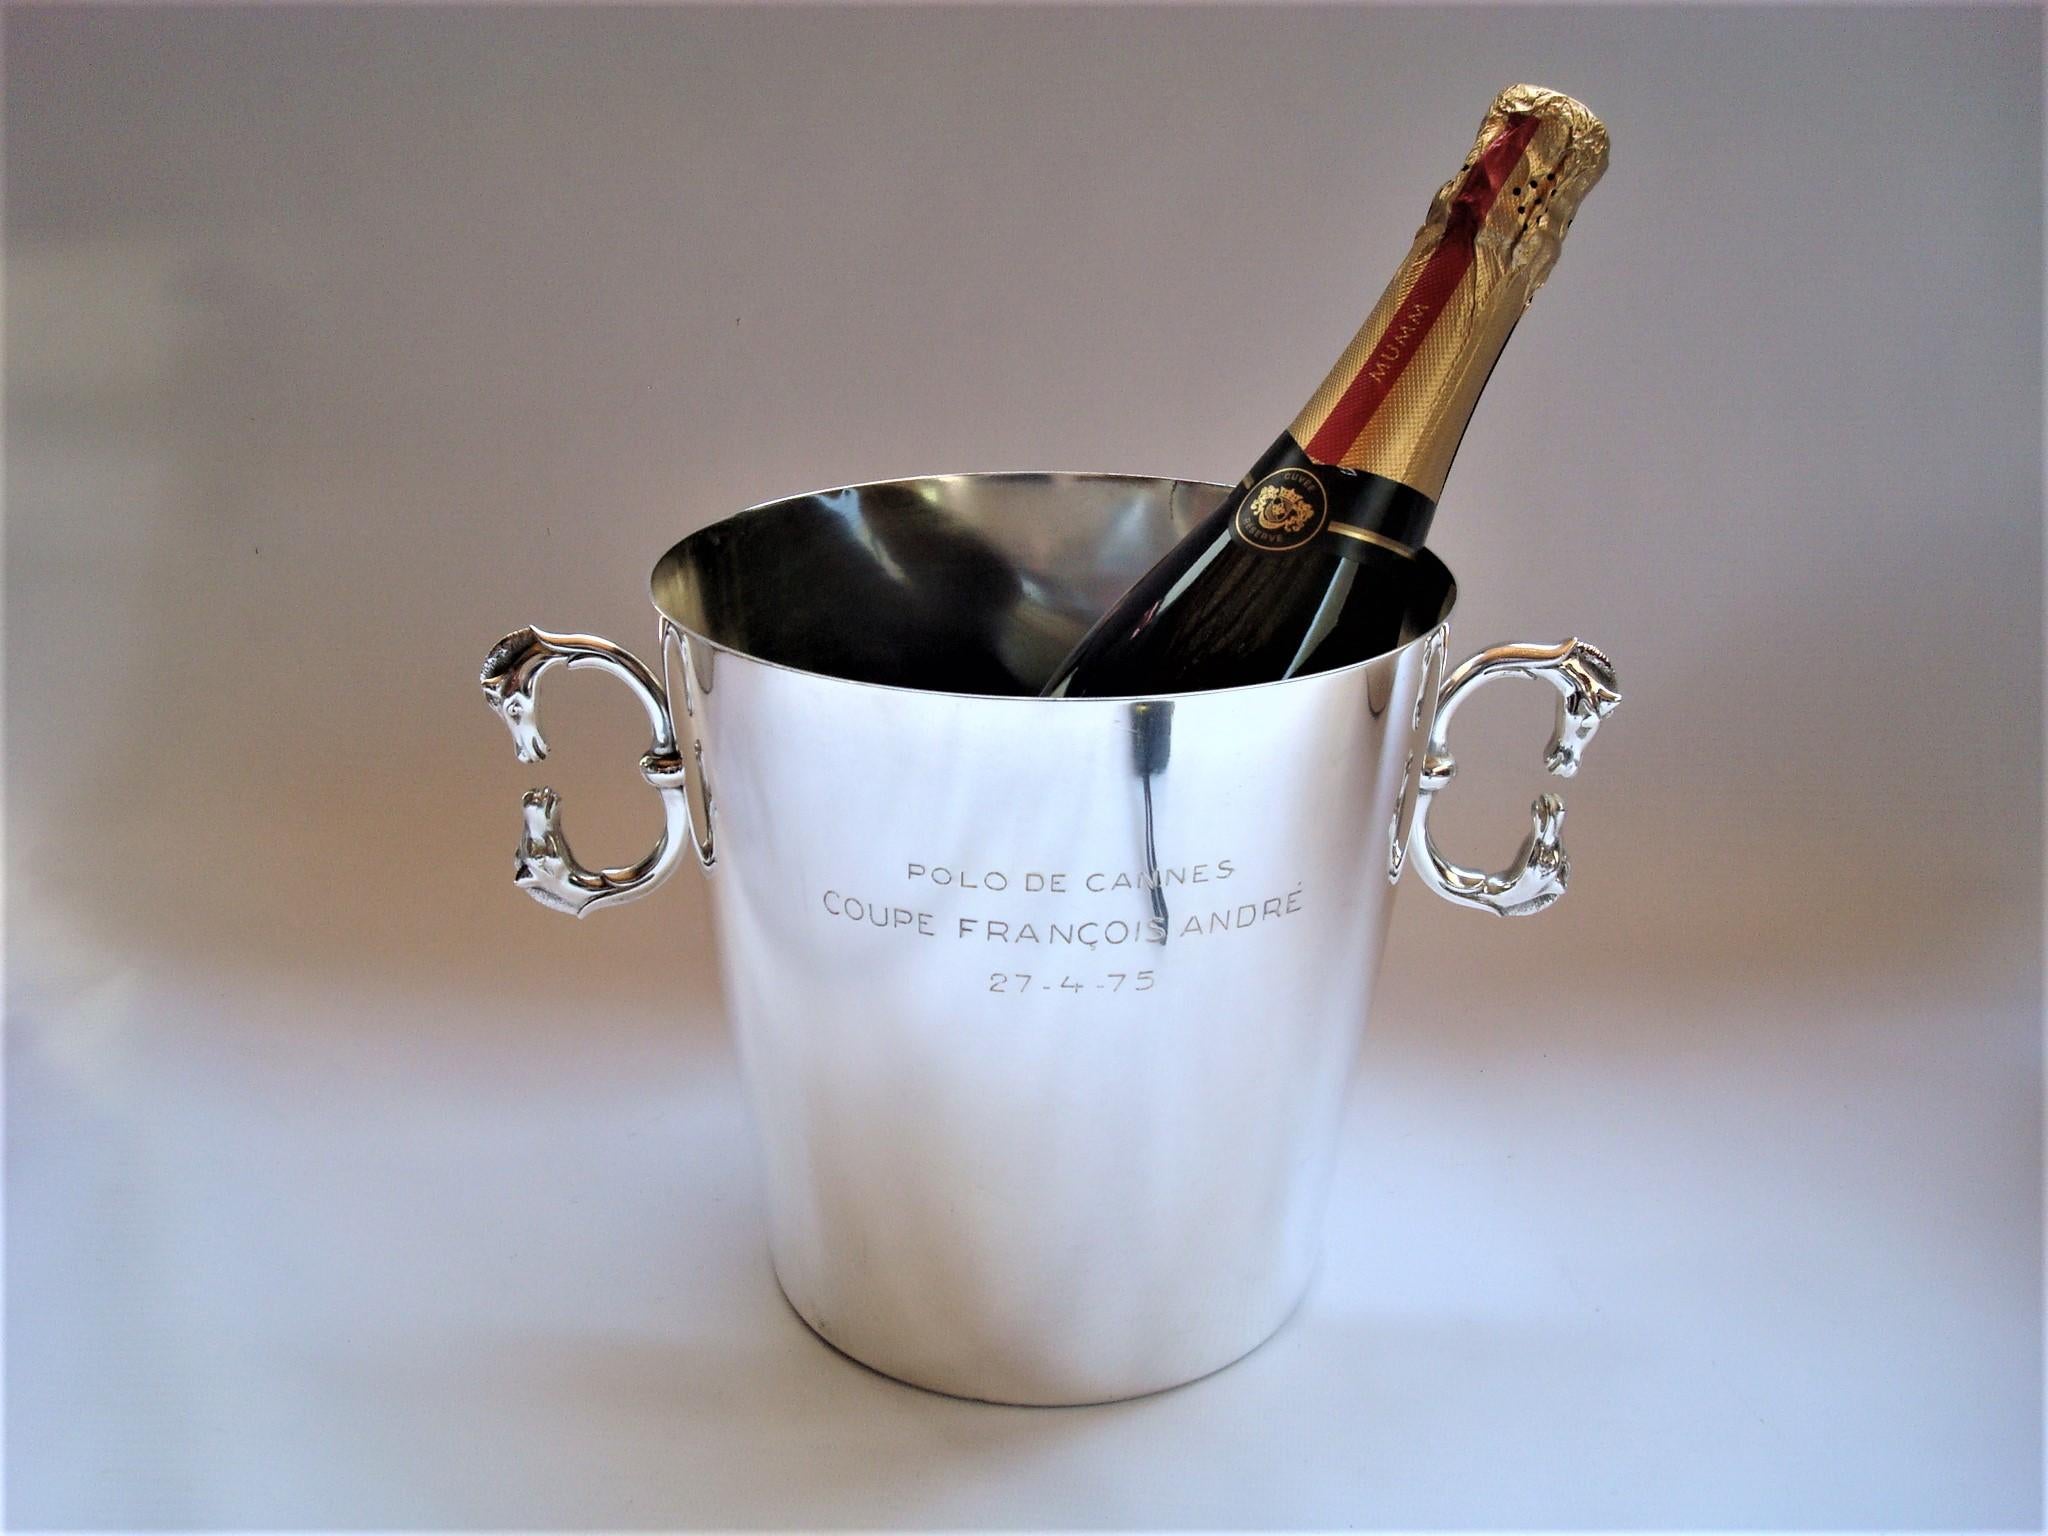 Hermes Champagne / Wine Bucket - Cooler. Polo Trophy Cannes 1975.
This Hermes ice bucket has double horse handles... and is super chic.
Amazing Hermès Horse Head Equestrian champagne ice bucket.
Given as a polo trophy in the 1970´s. 
Engraved :